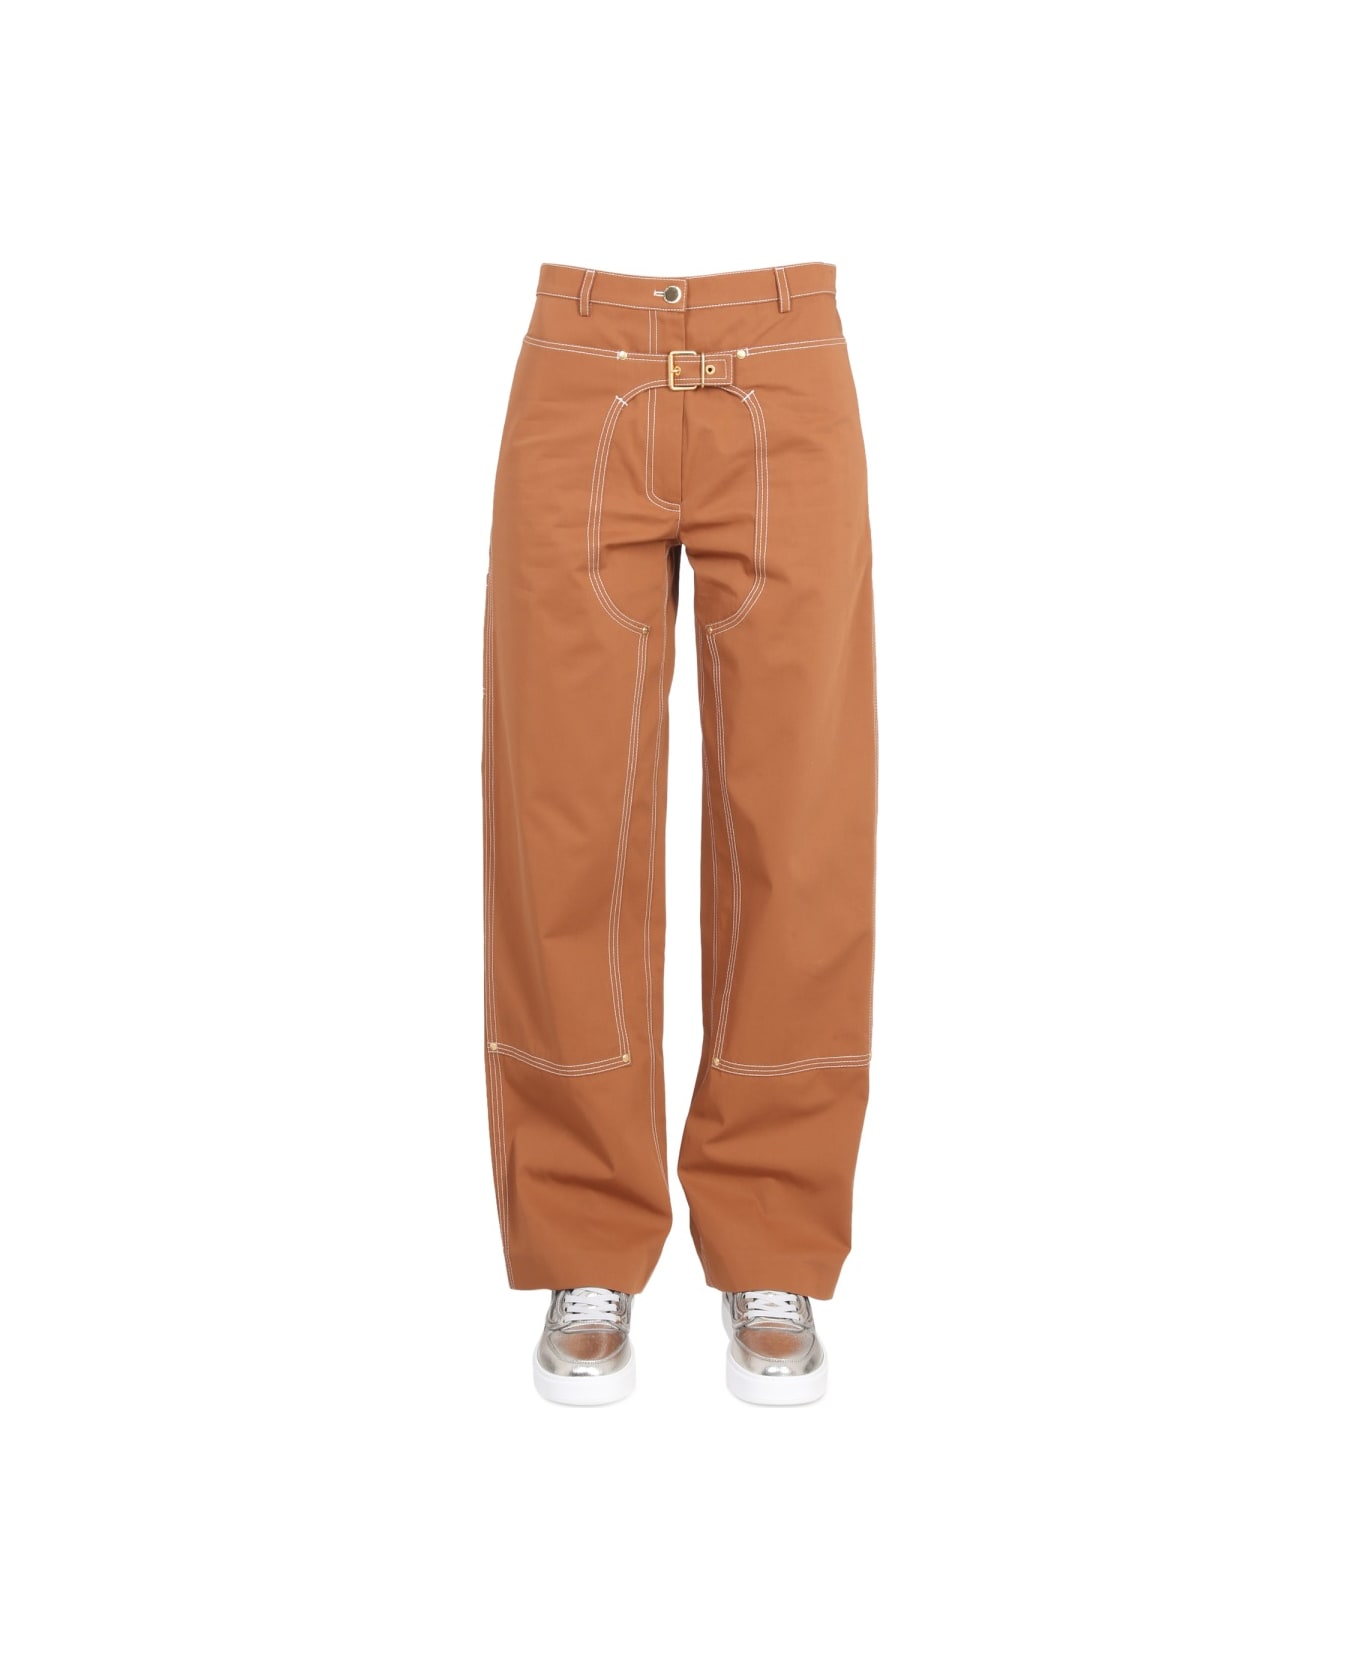 Stella McCartney Pants With Buckle - BROWN